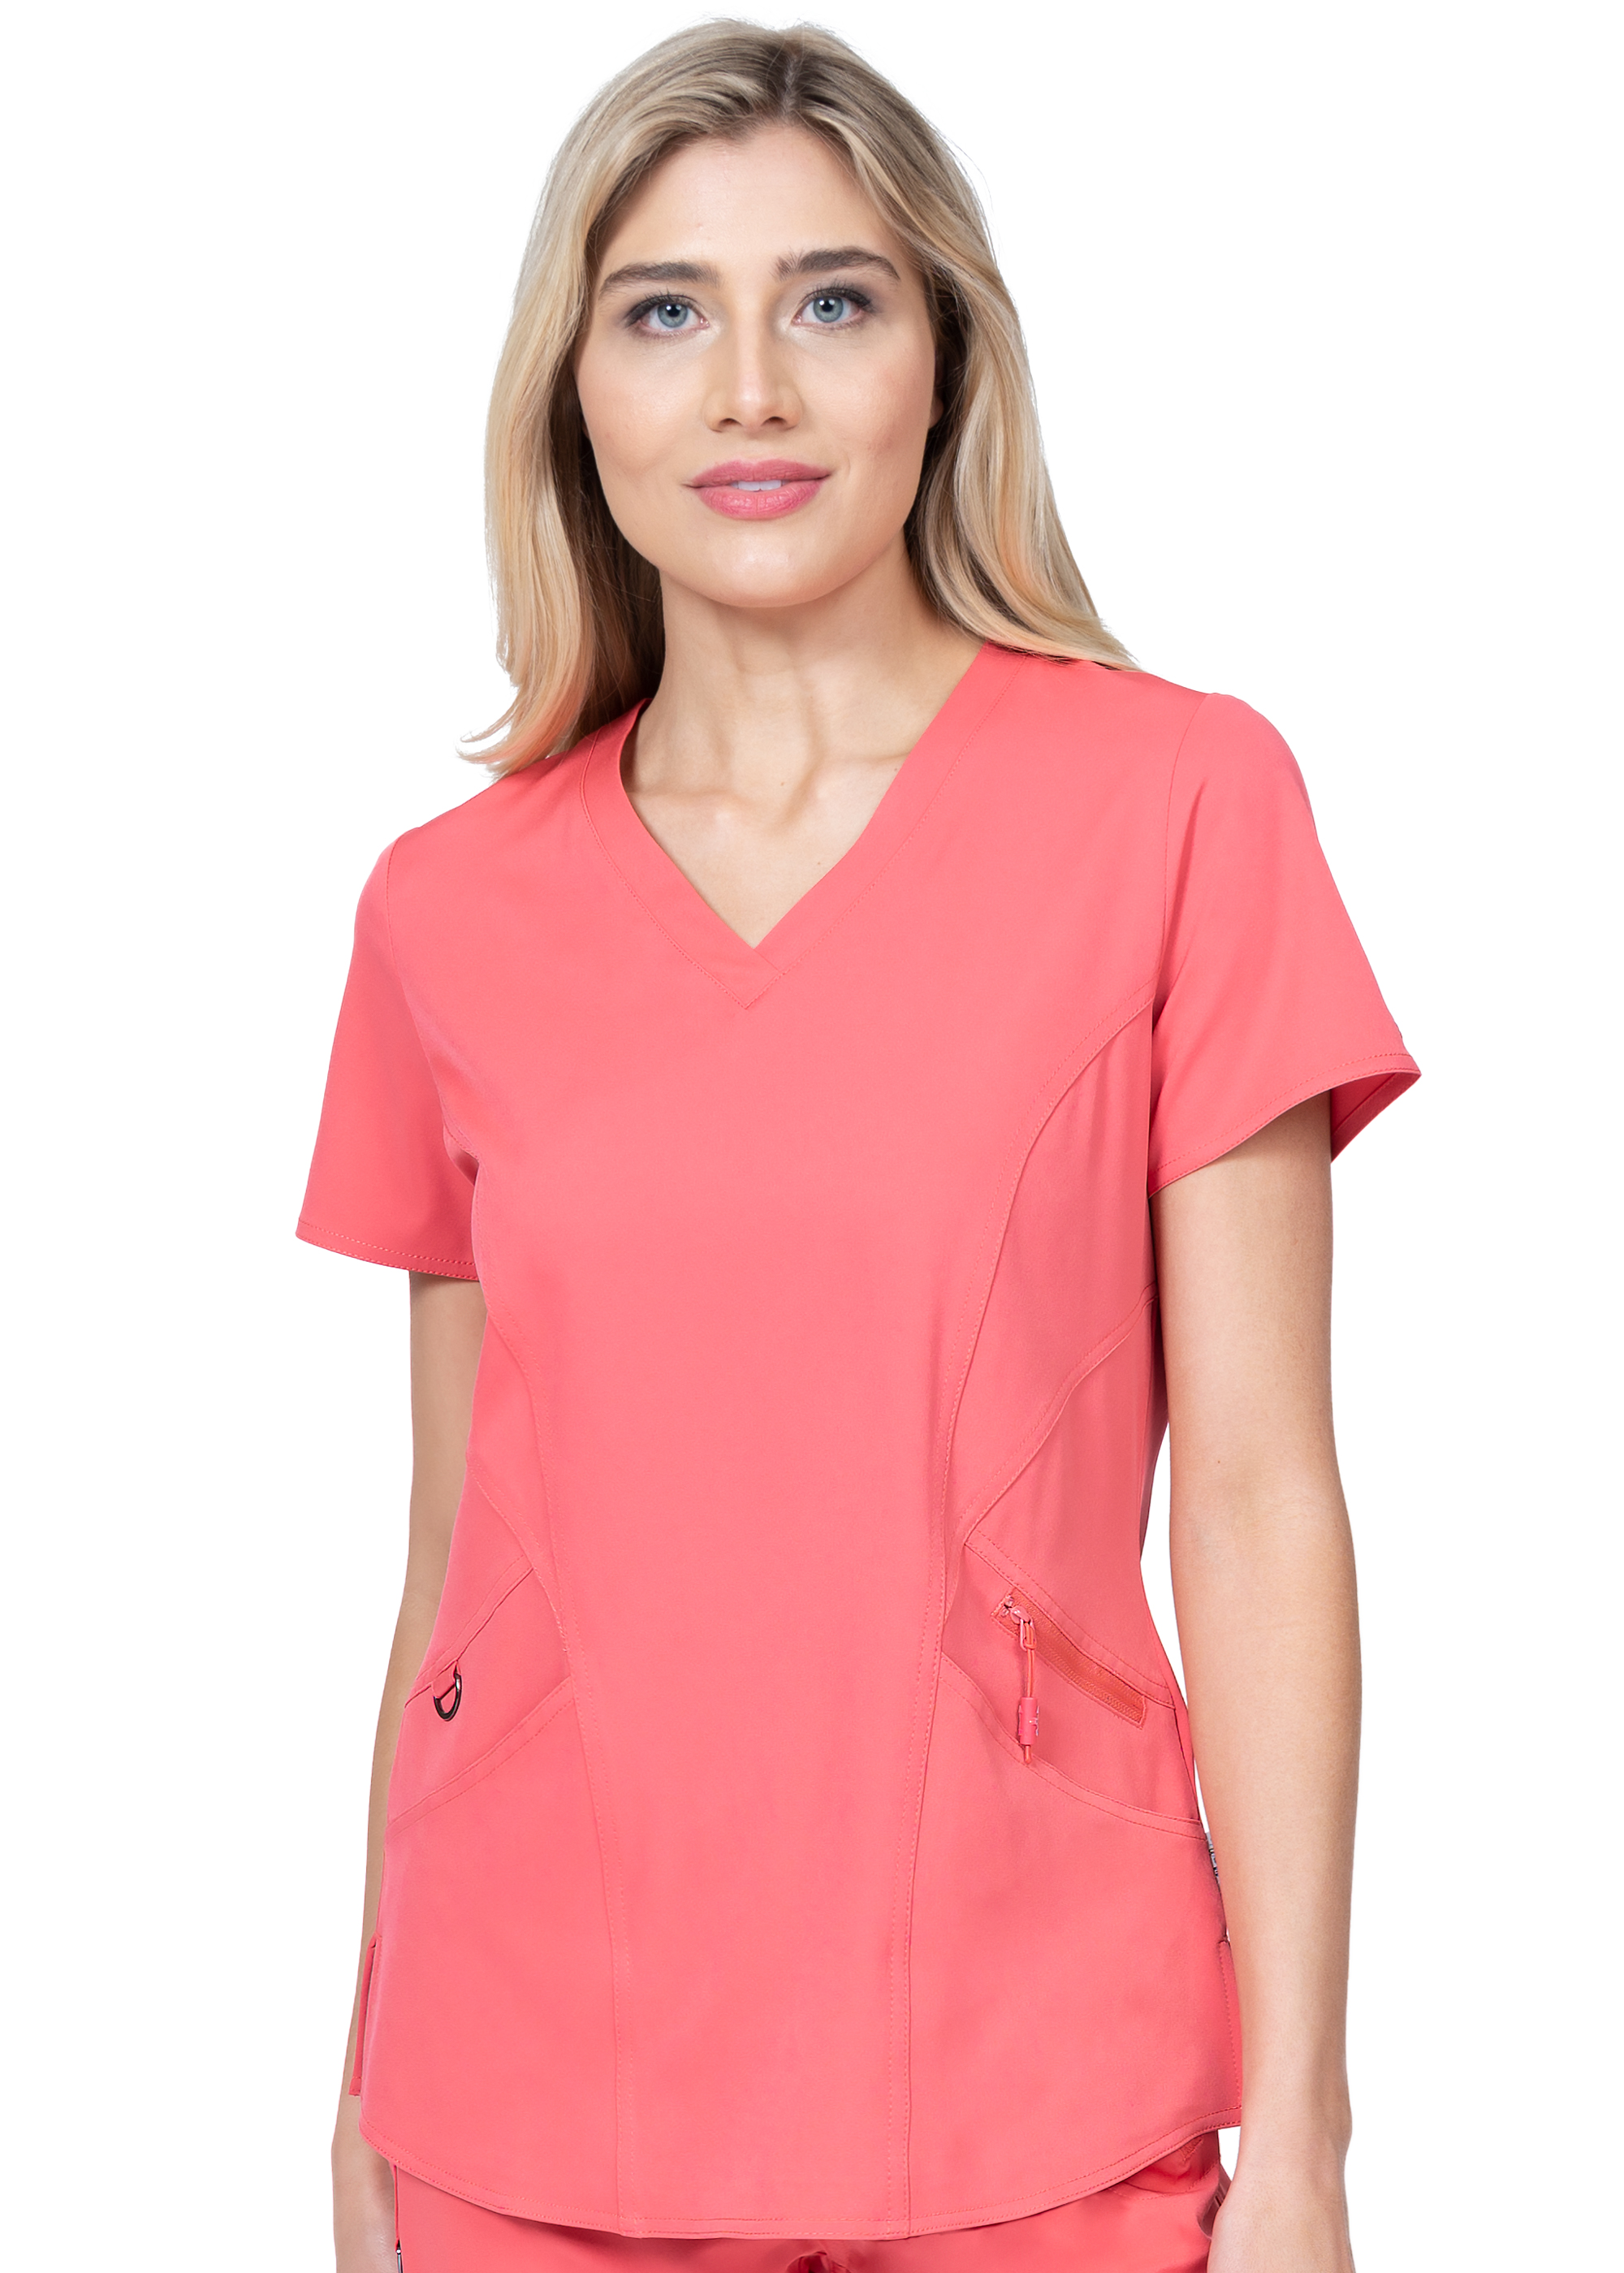 Scrubs Heartsoul Short Sleeve Scrub Top 20710 PNKH Pink Party Free Shipping 